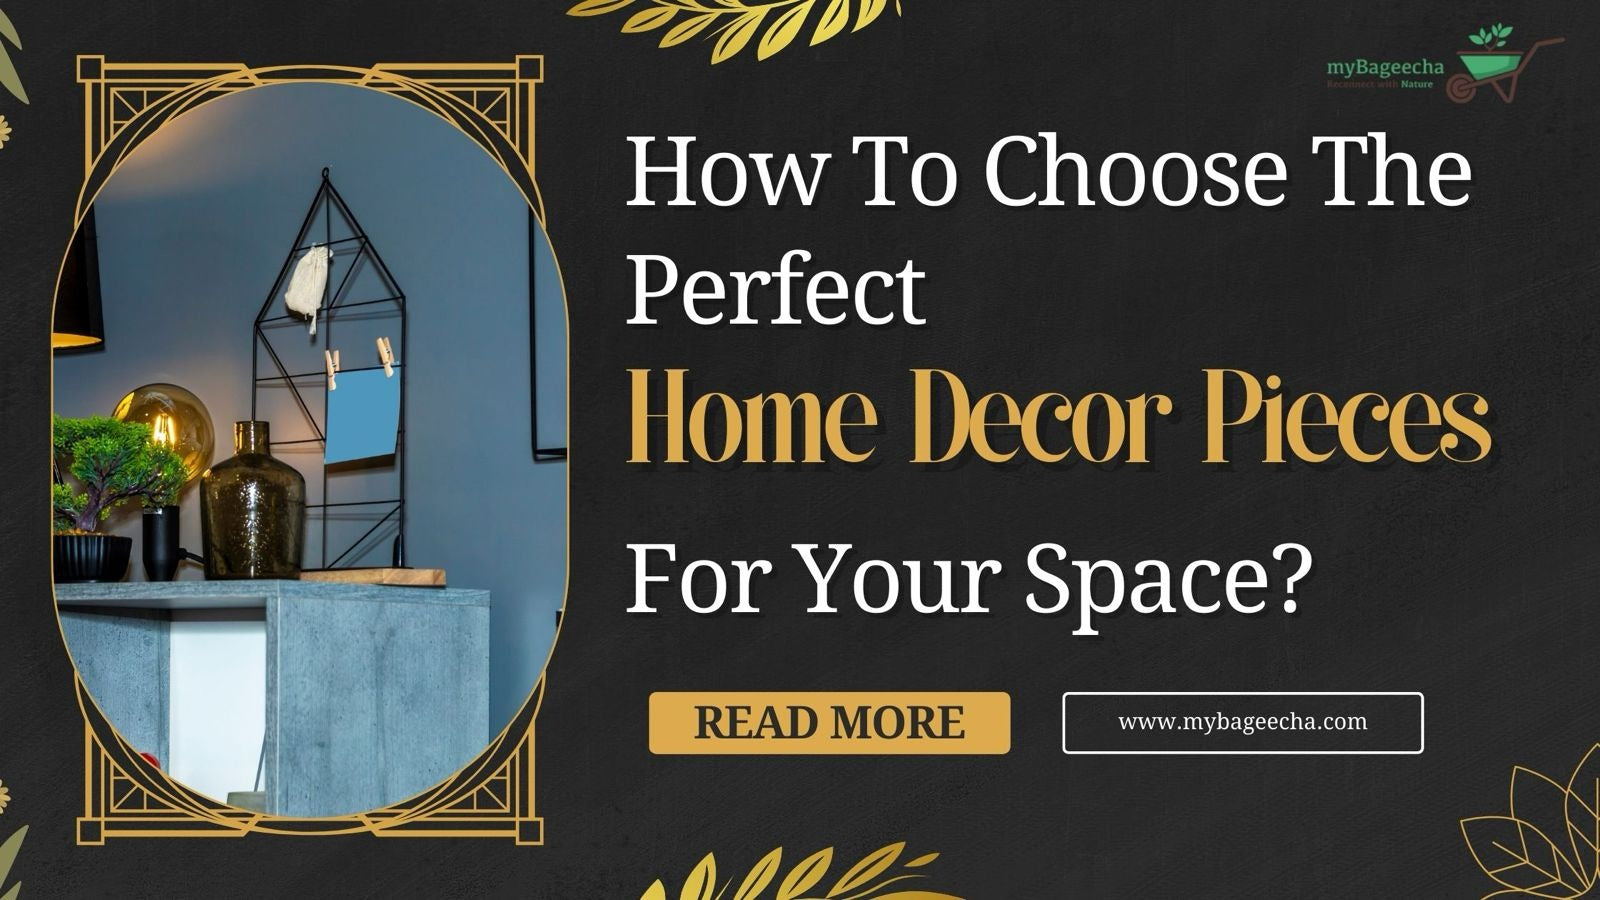 How To Choose The Perfect Home Decor Pieces For Your Space?